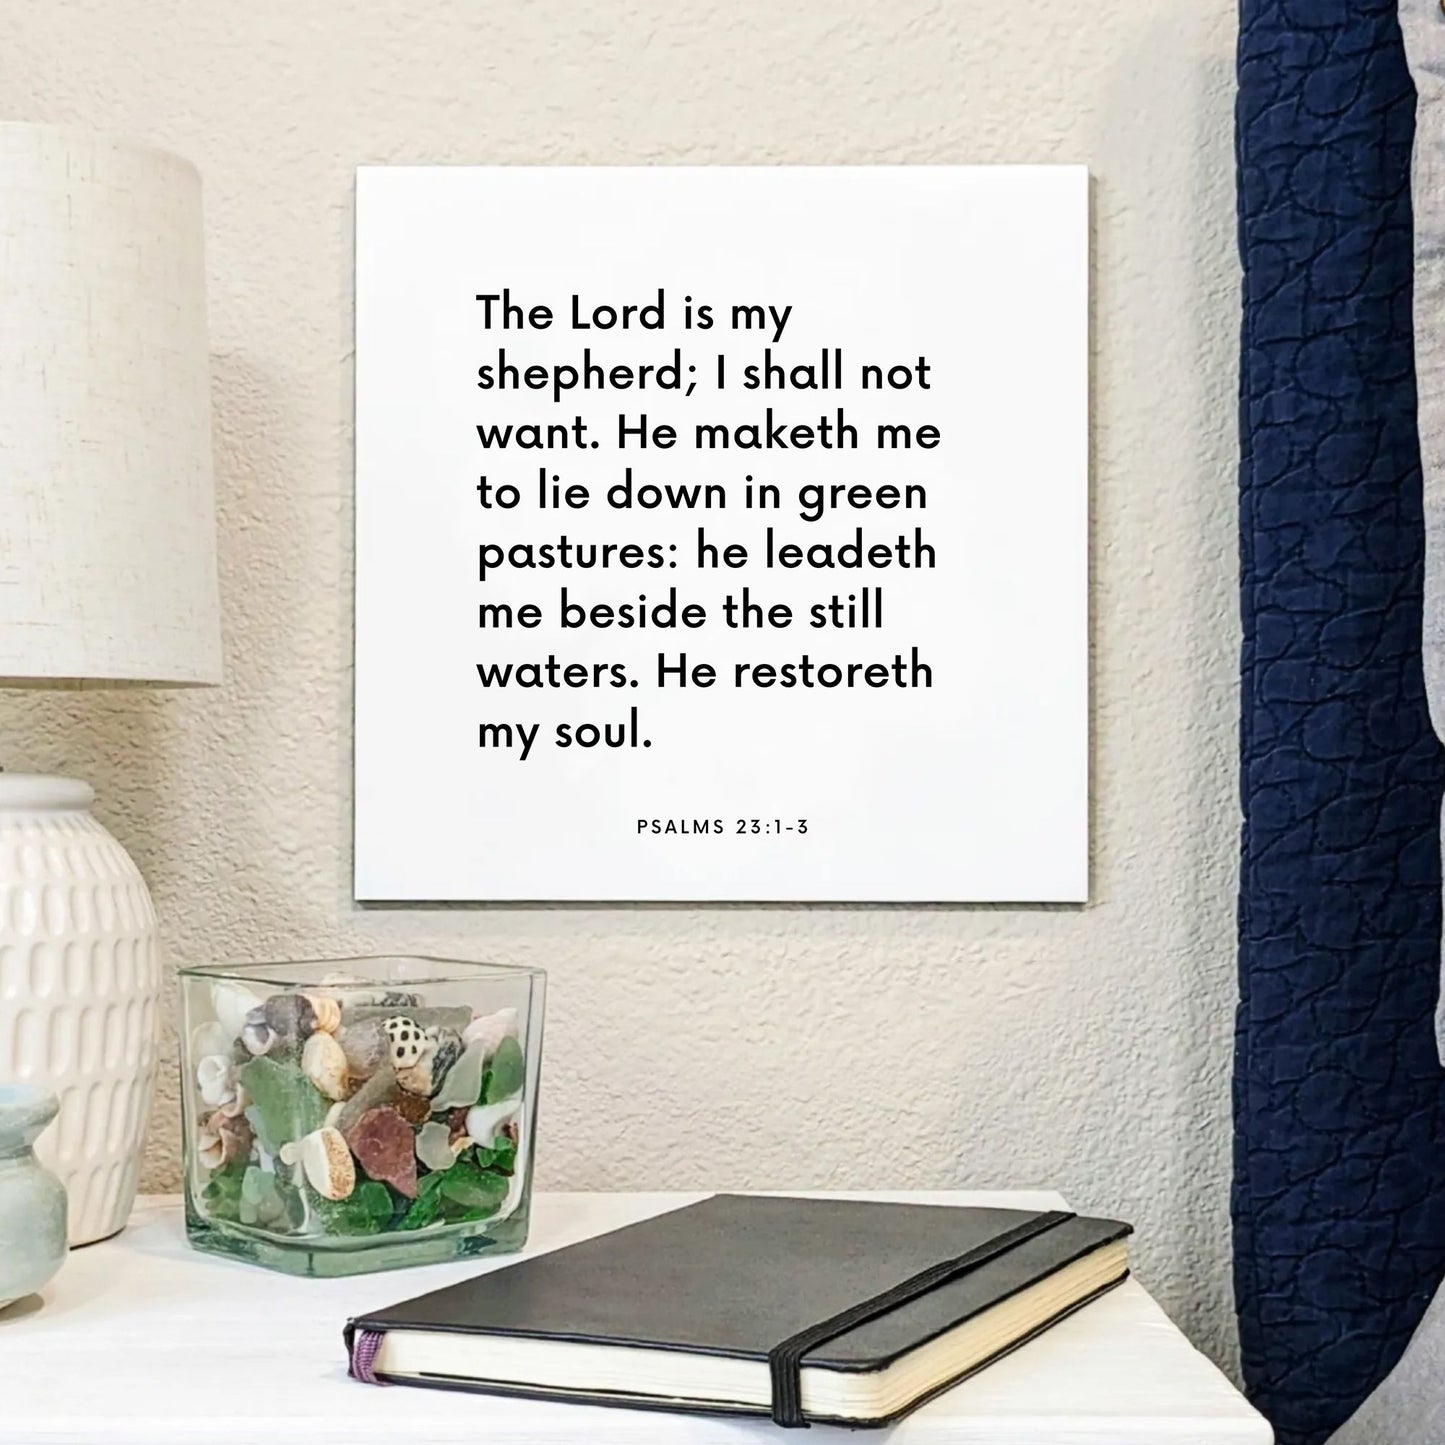 Bedside mouting of the scripture tile for Psalms 23:1-3 - "The Lord is my shepherd; I shall not want"